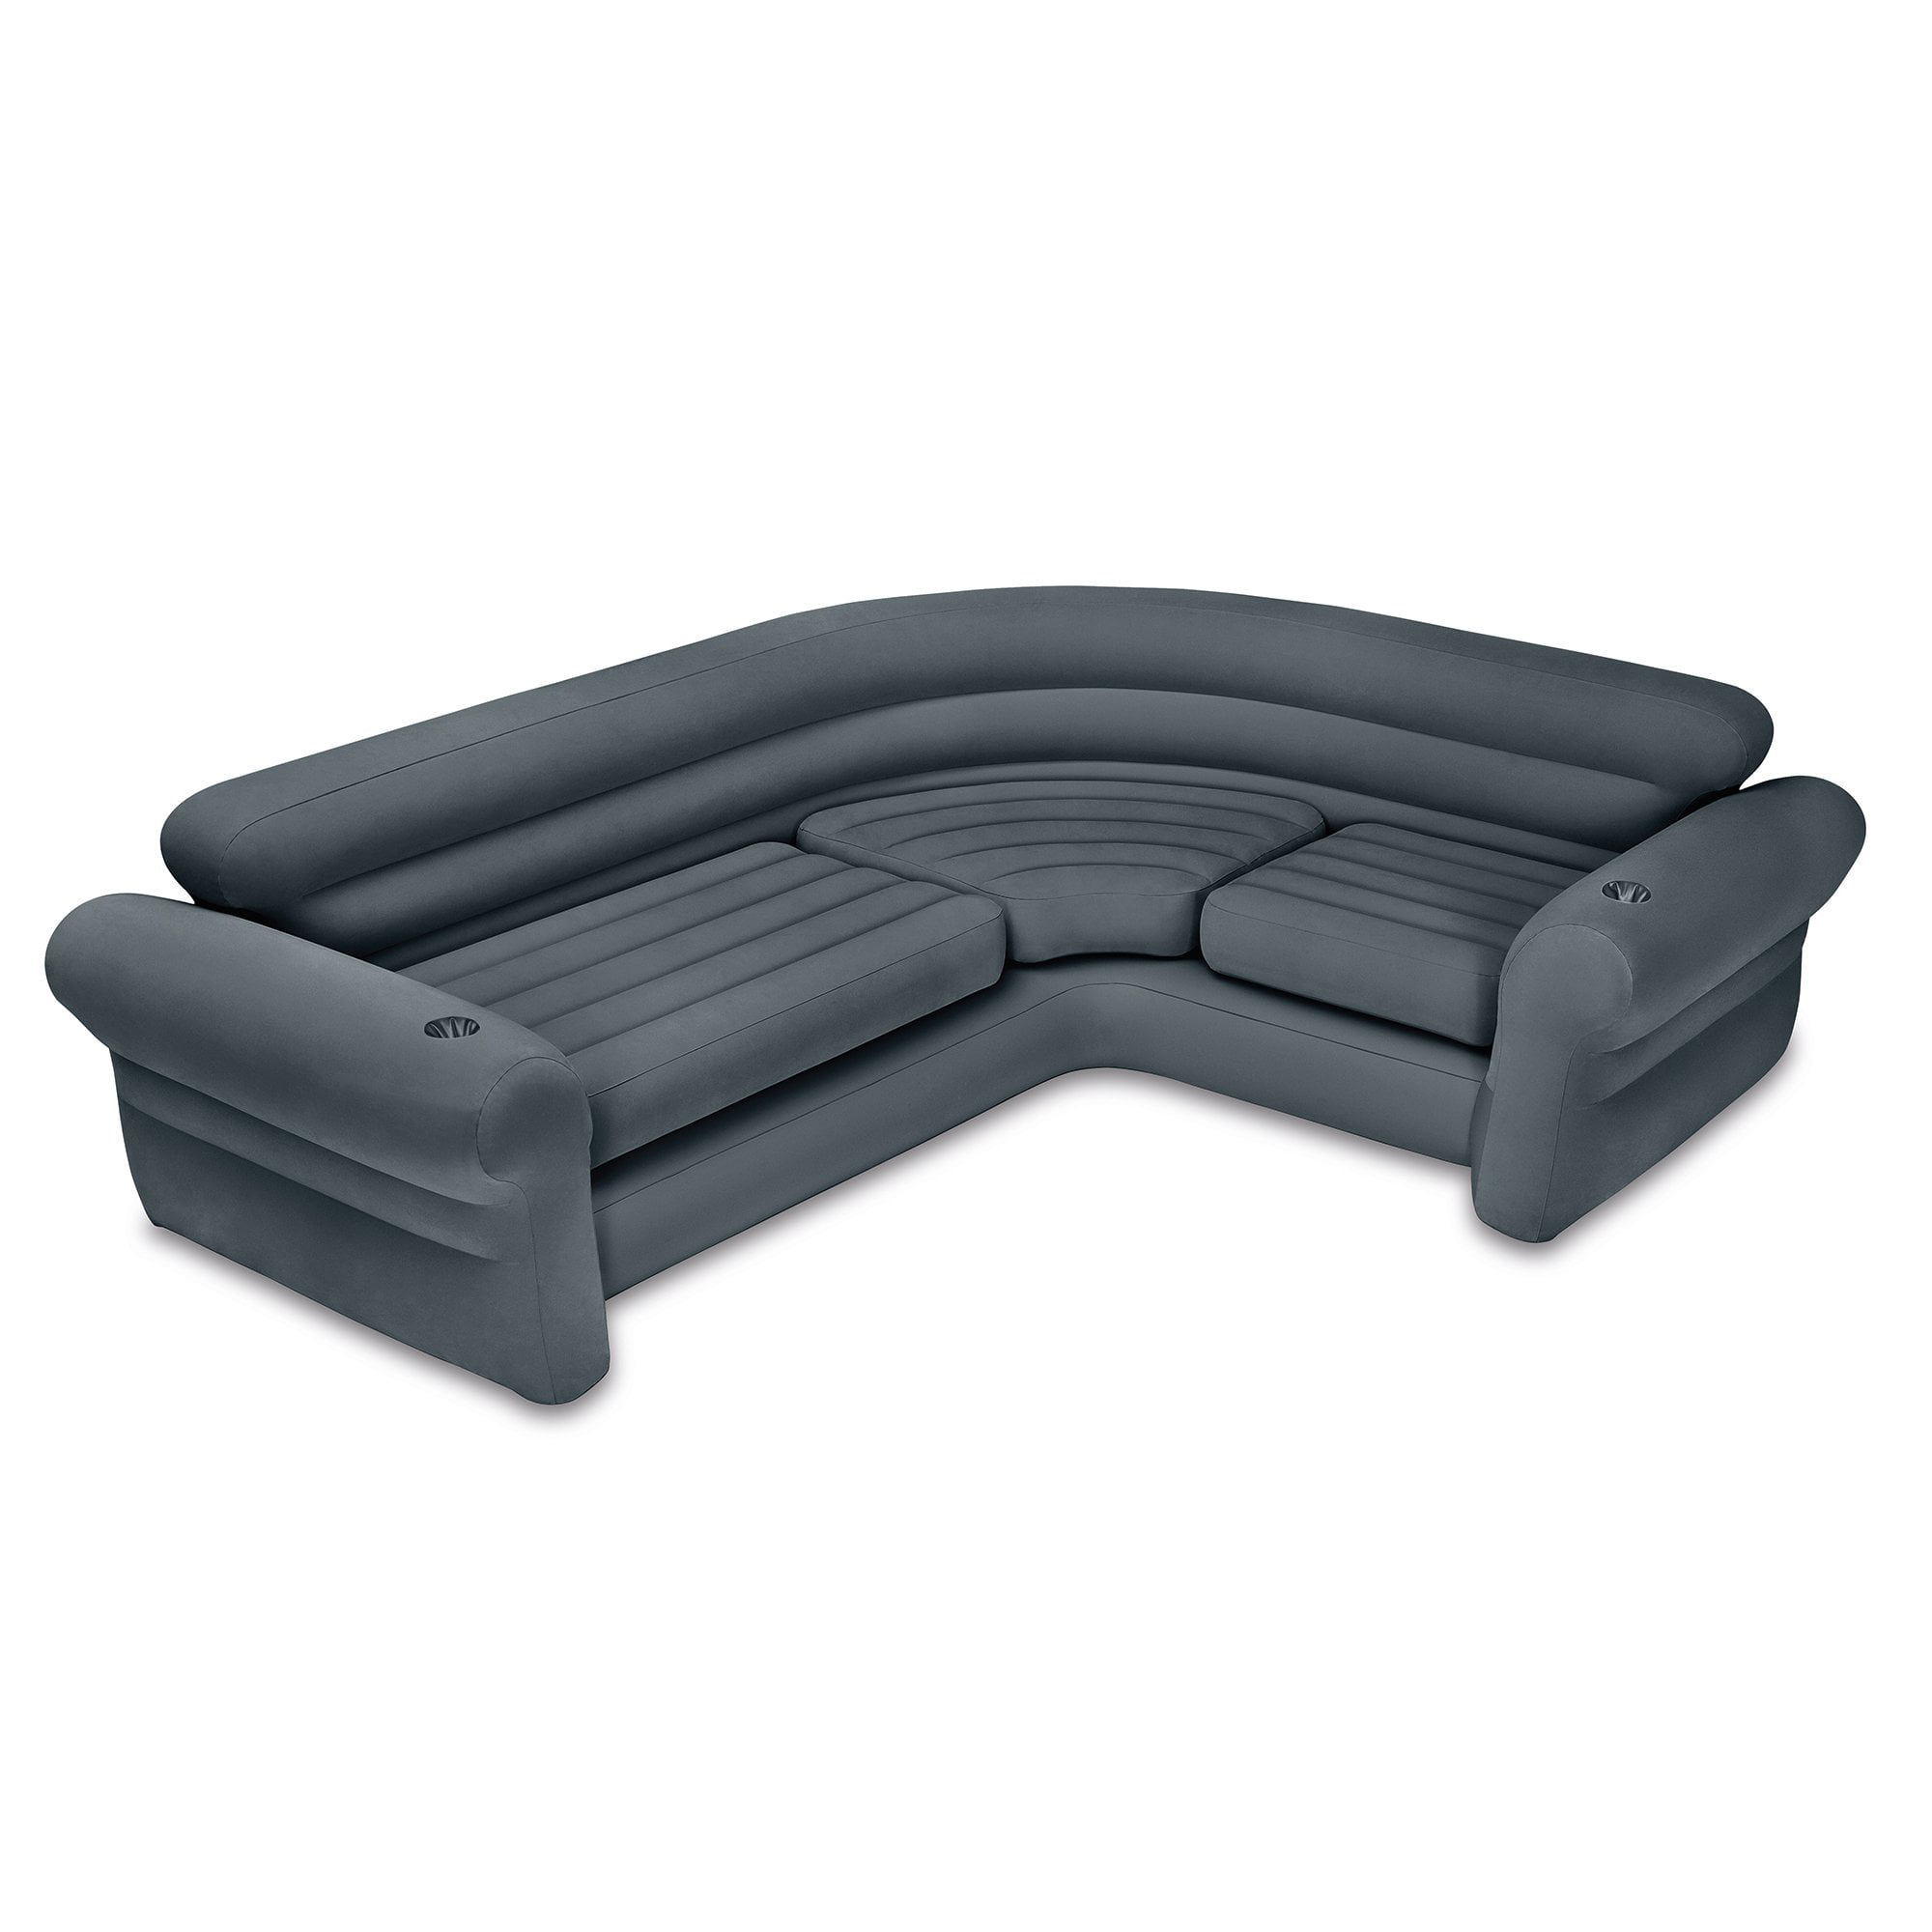 Intex Pull Out Love Seat Inflatable Dorm Rec Room Bed Sleep Sit Relax Read Home 